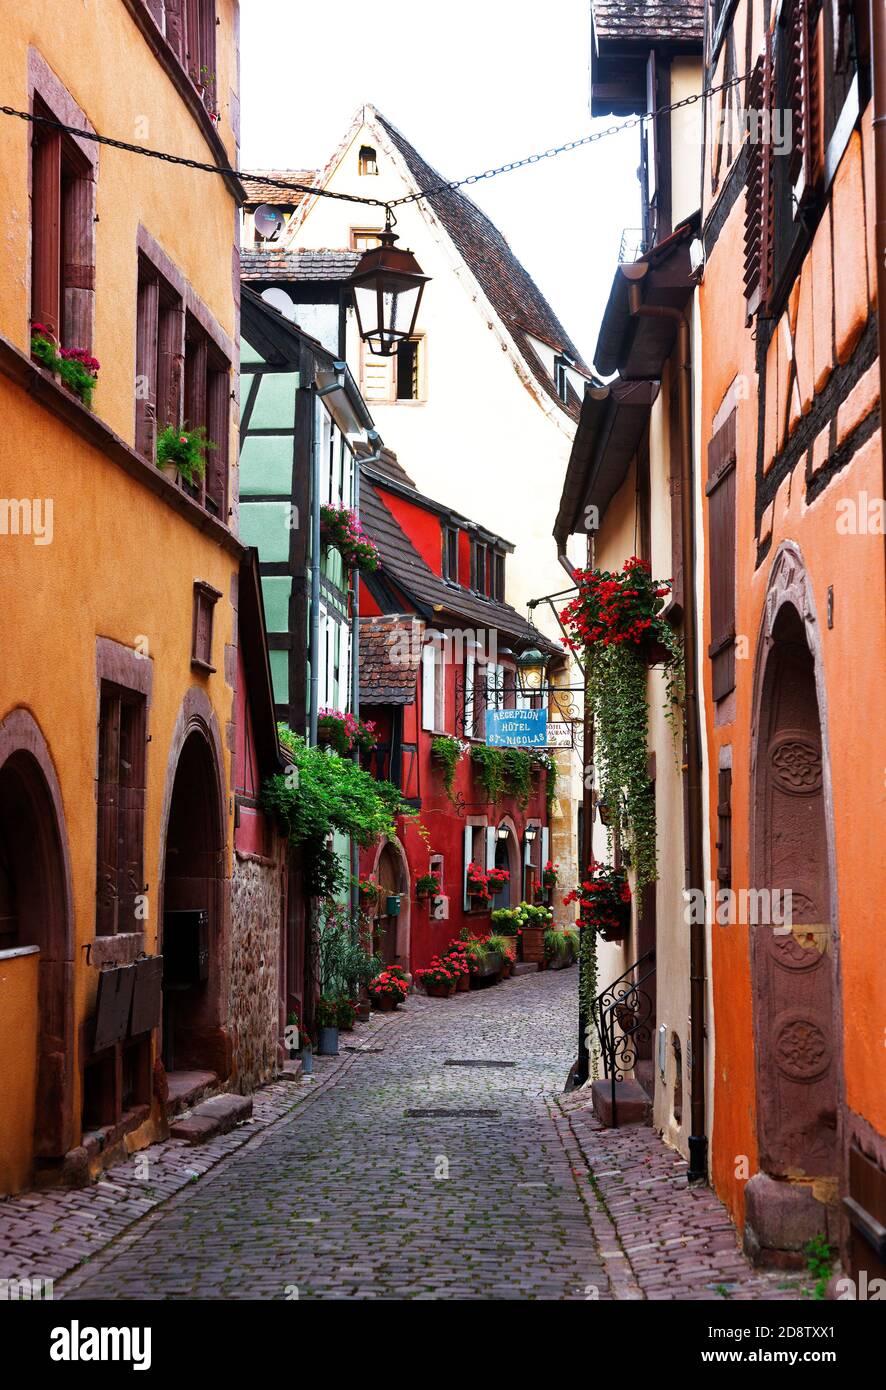 Cobblestone street and colorful medieval village in Alsace region, Riquewihr, France Stock Photo